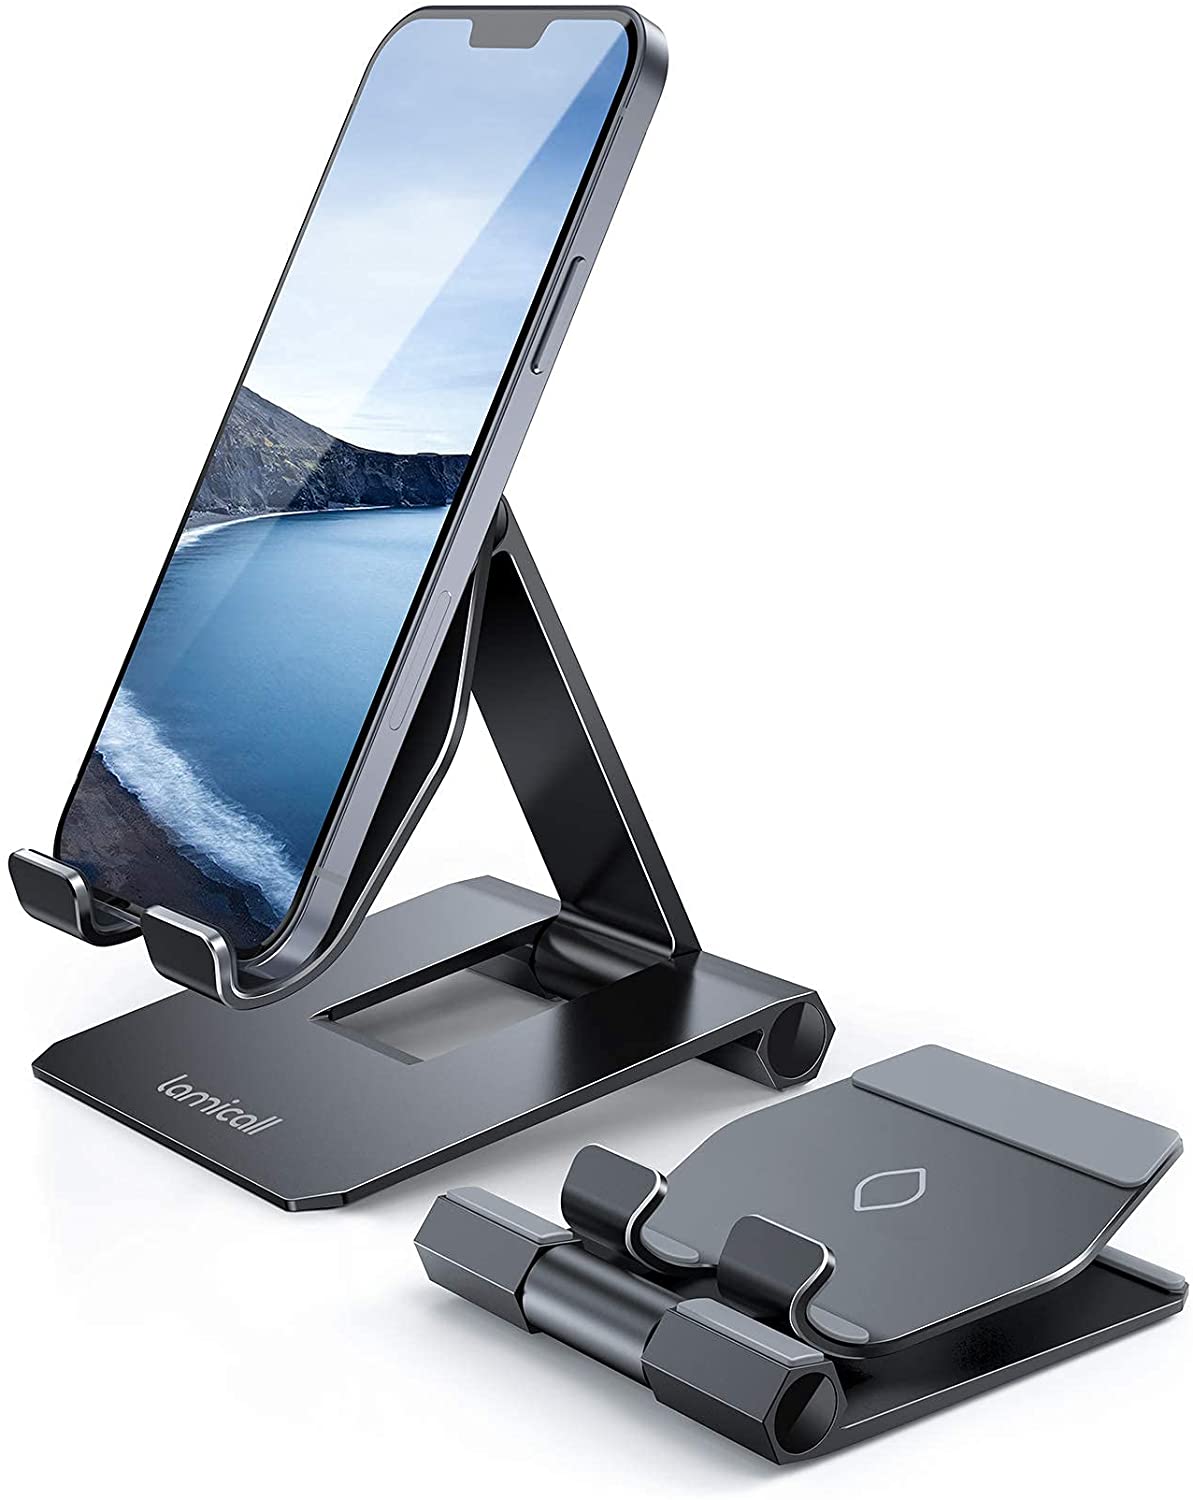 Adjustable Desk Cell Phone Stand